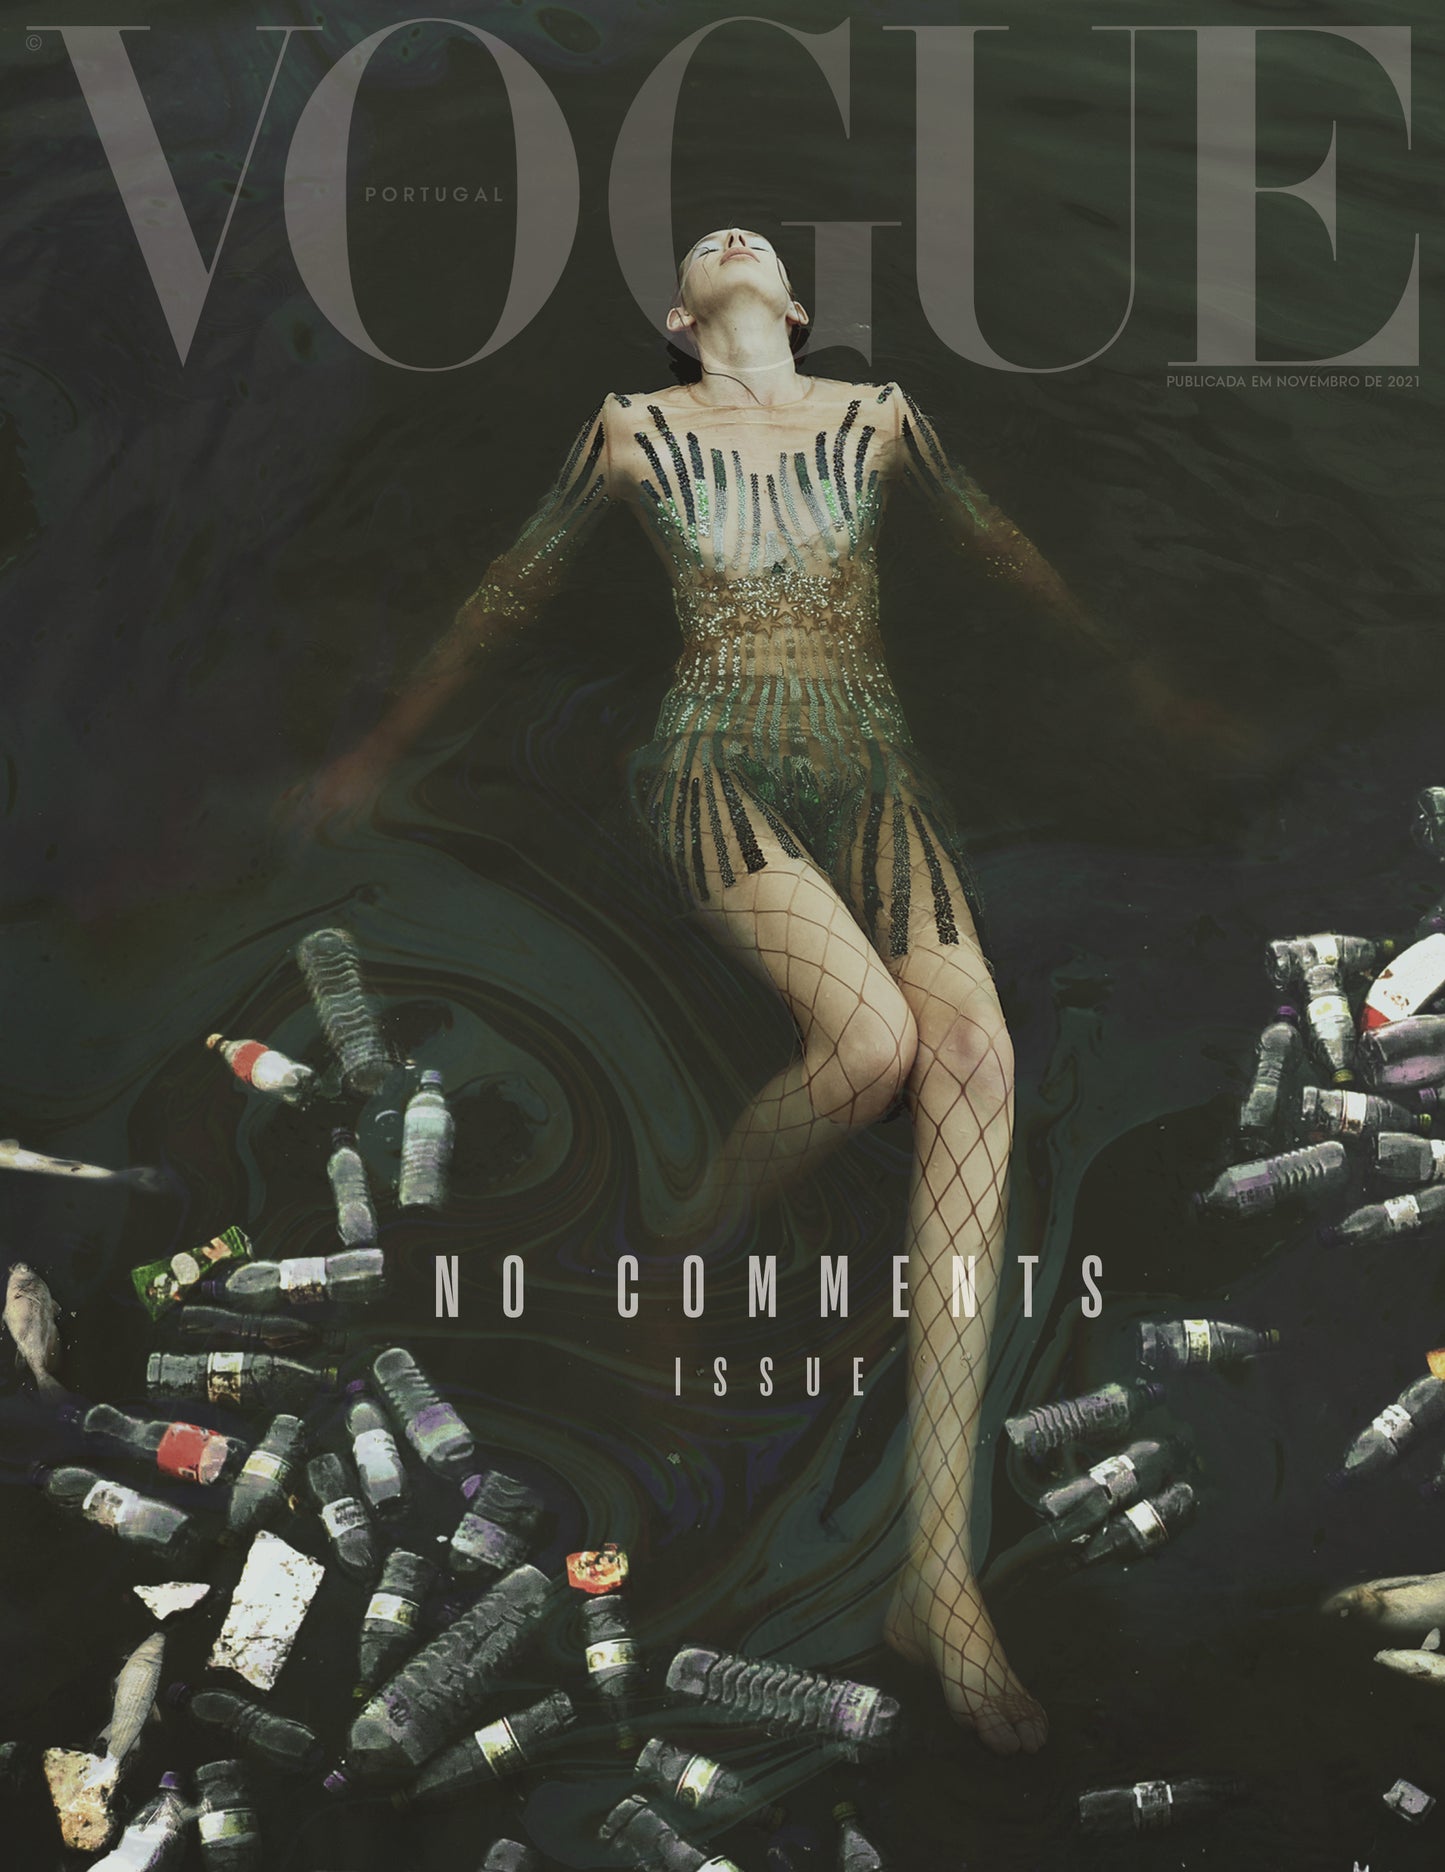 No Comments Issue -  Cover 2